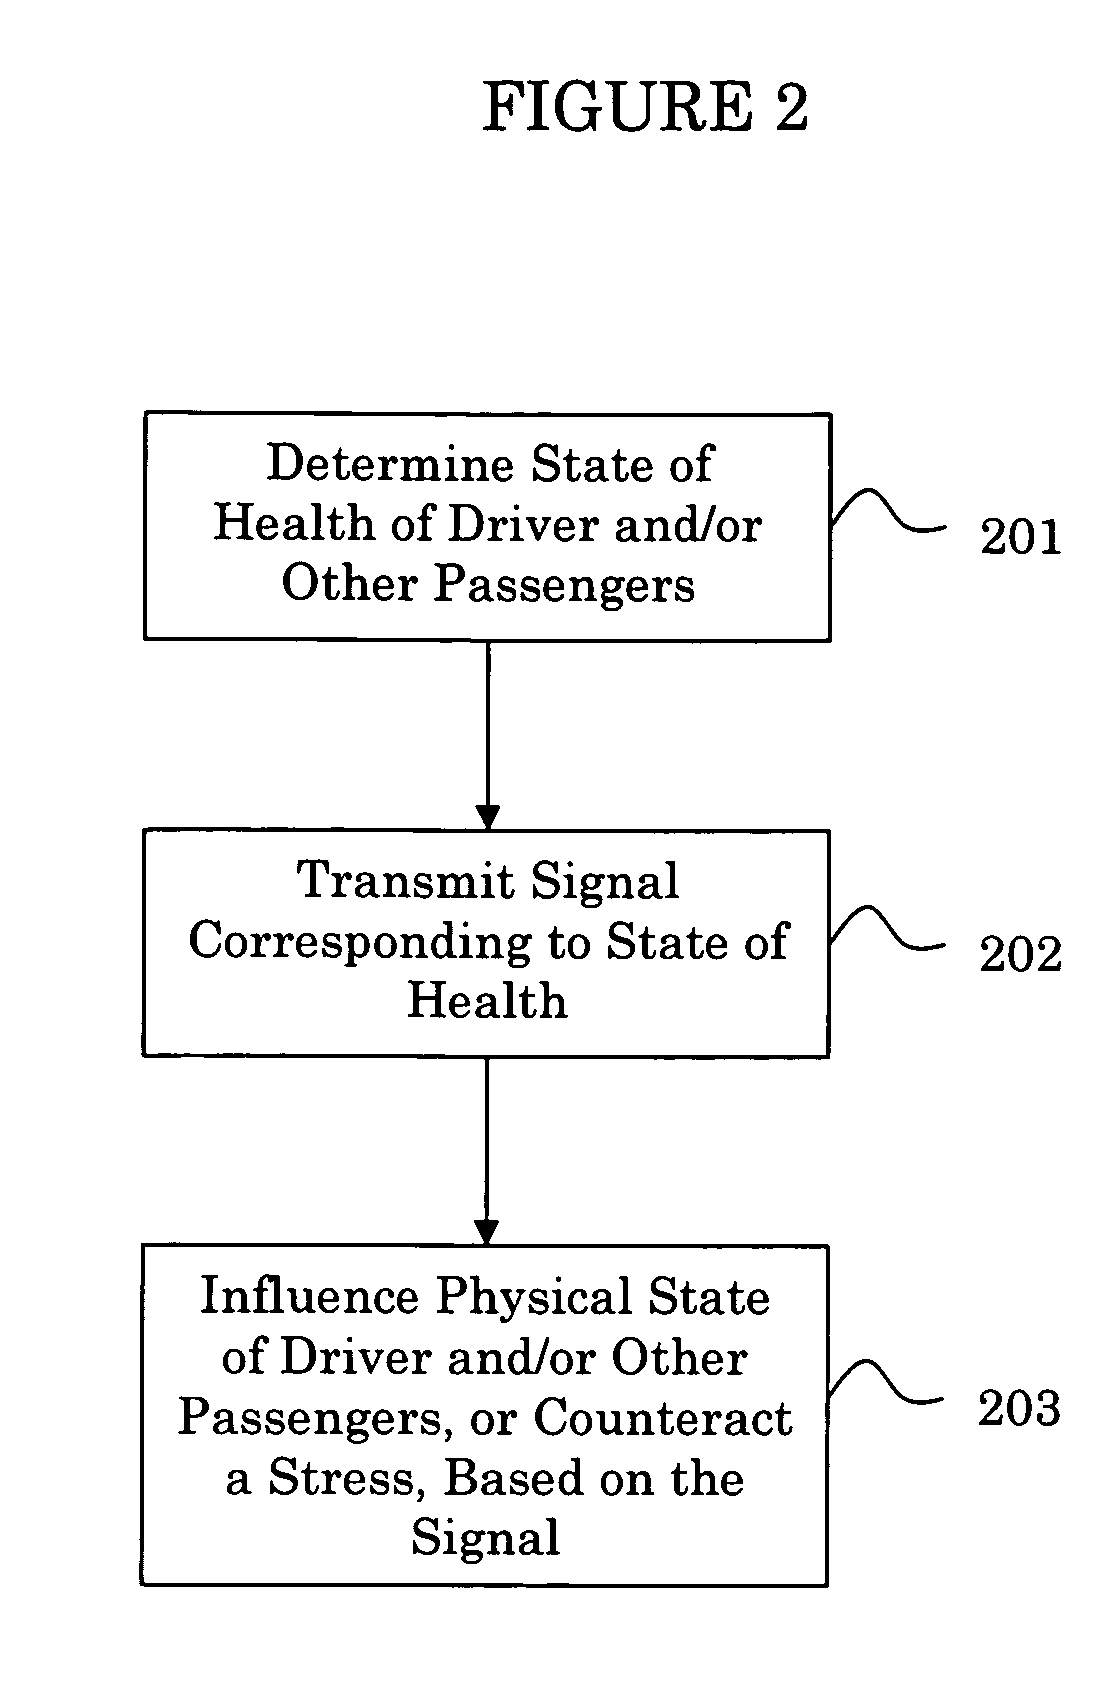 Operating method for vehicles